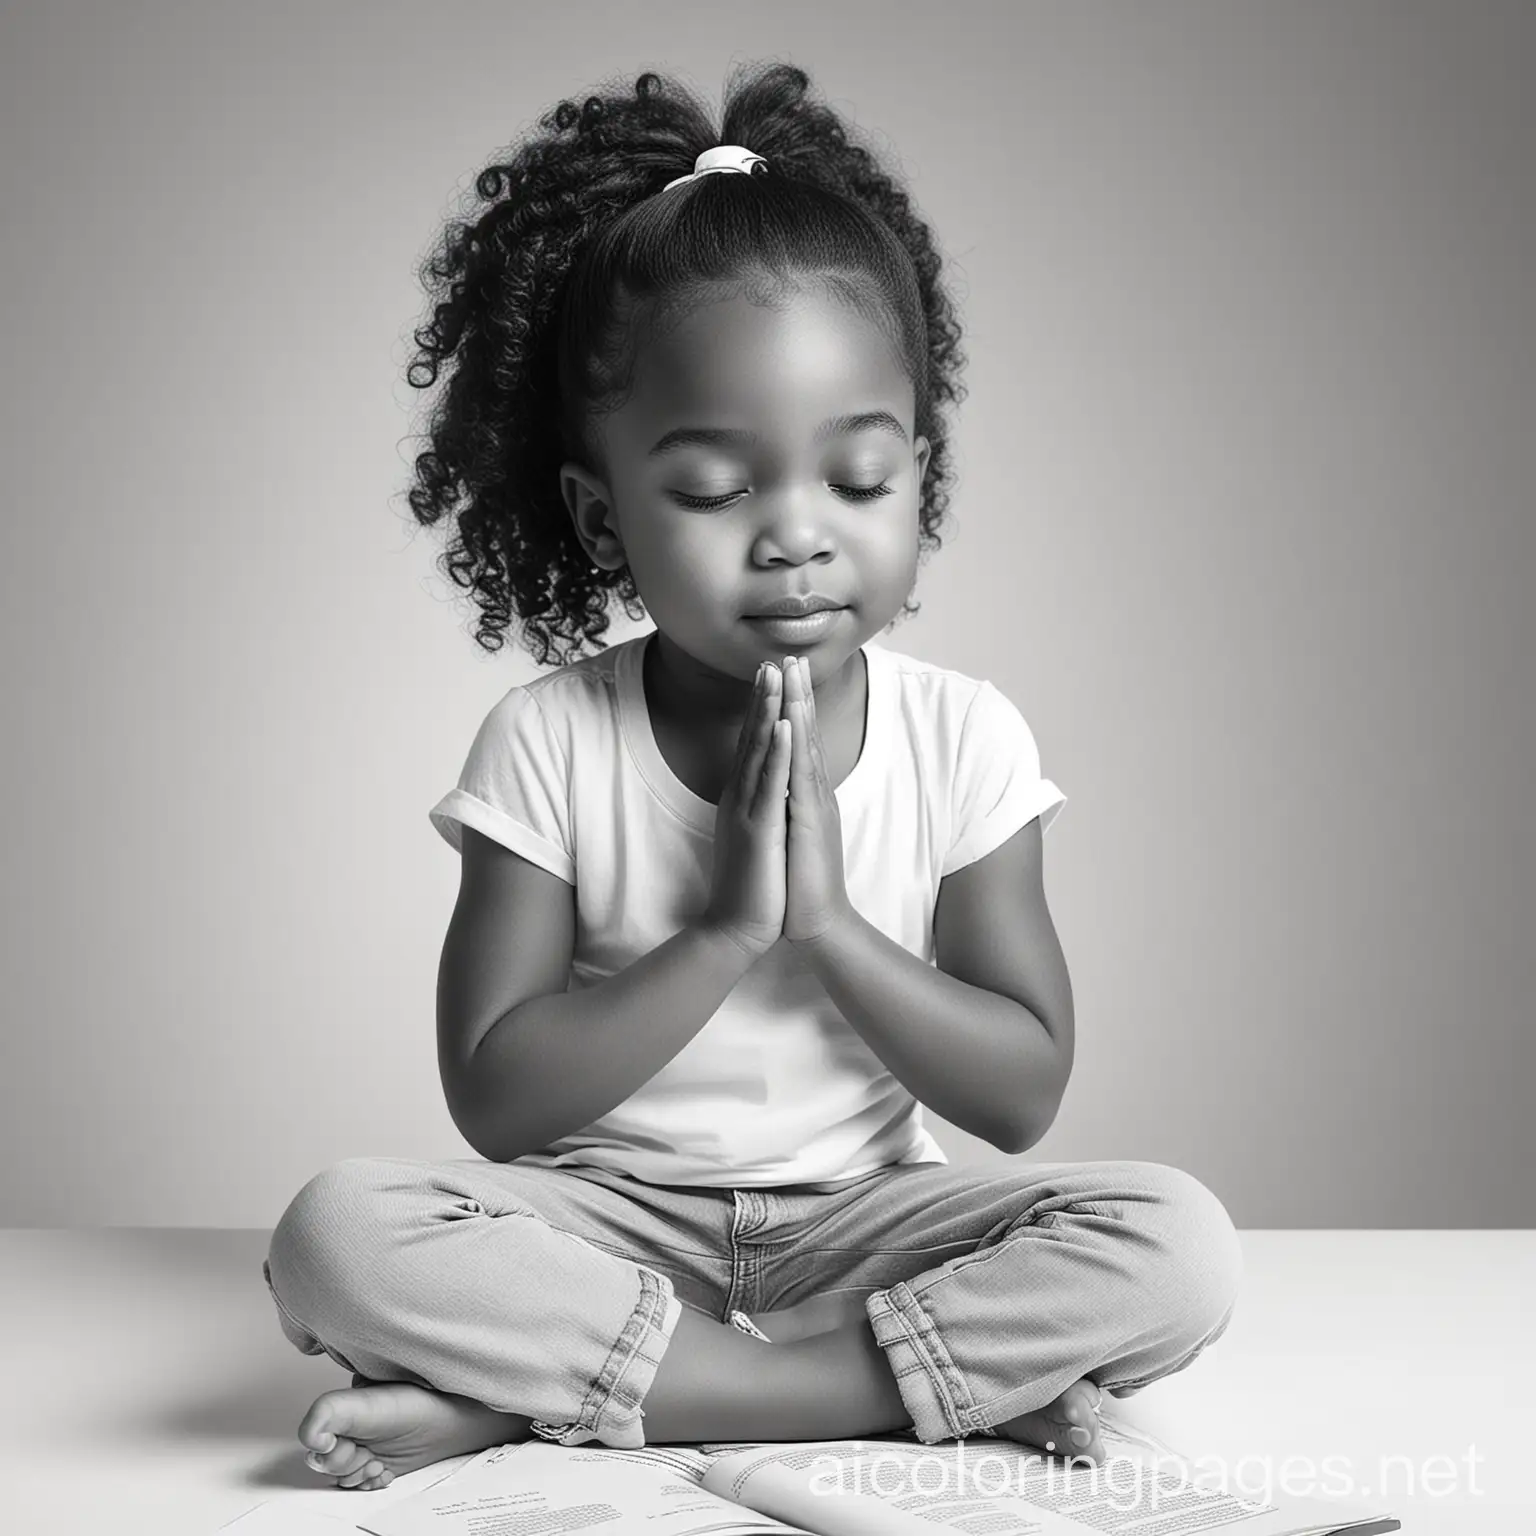 cartoon image of African American child, wearing white top and jeans sitting at a table, eyes closed, hands in praying position Holy Bible in front of her  Emotion is calm, serene, tranquil, Coloring Page, black and white, line art, white background, Simplicity, Ample White Space. The background of the coloring page is plain white to make it easy for young children to color within the lines. The outlines of all the subjects are easy to distinguish, making it simple for kids to color without too much difficulty